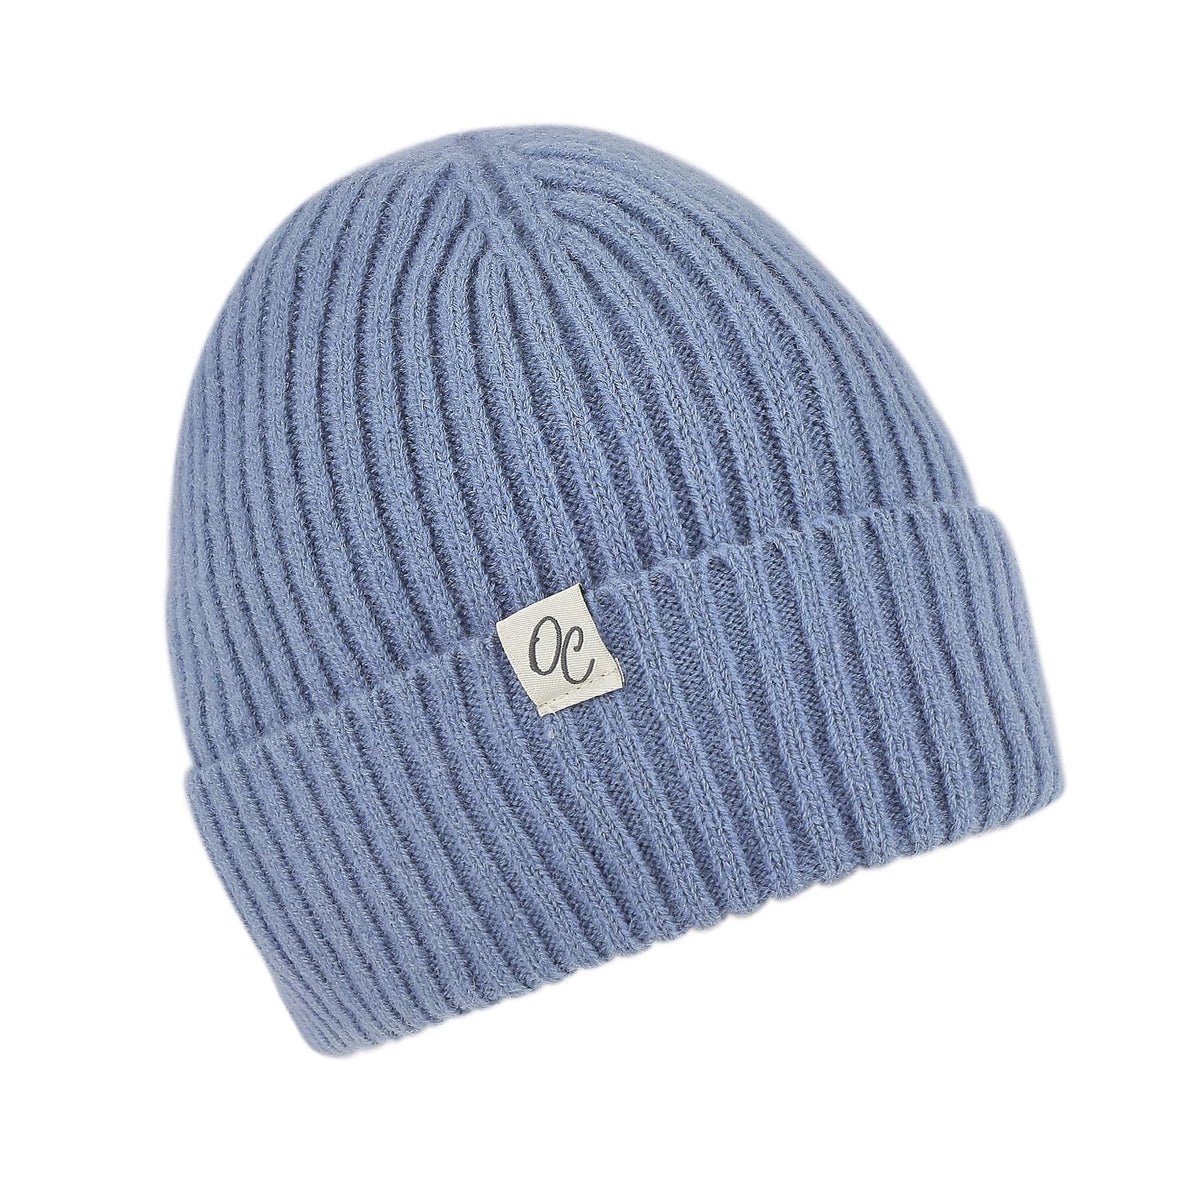 Only Curls Satin Lined Spring Beanie Hat - Dusty Blue - Only Curls